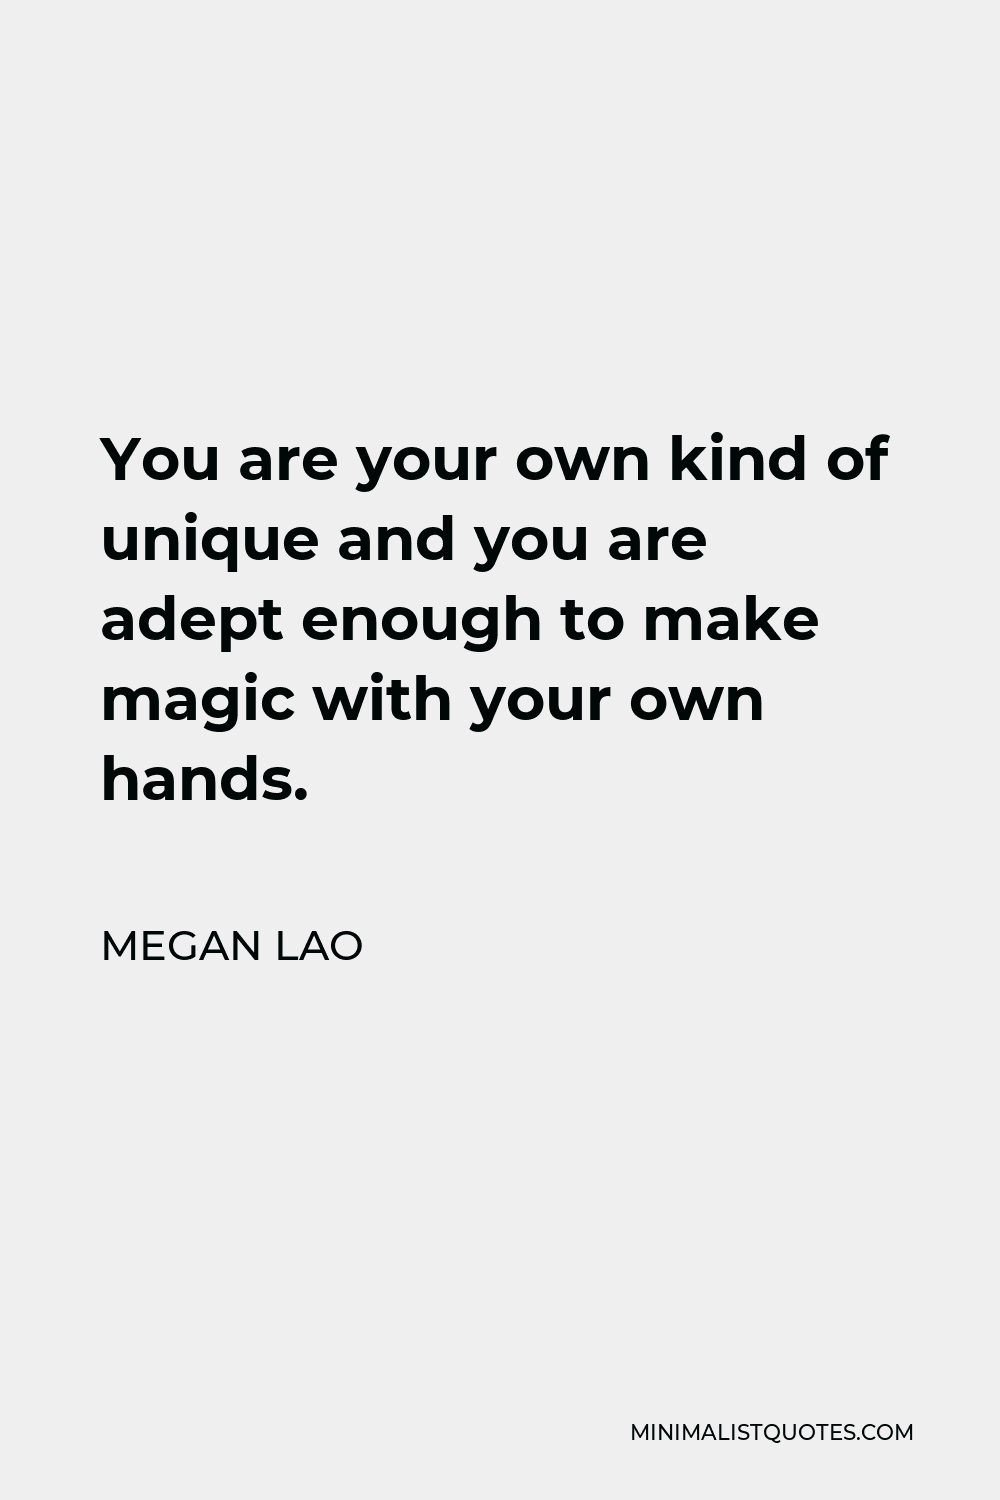 Megan Lao Quote - You are your own kind of unique and you are adept enough to make magic with your own hands.